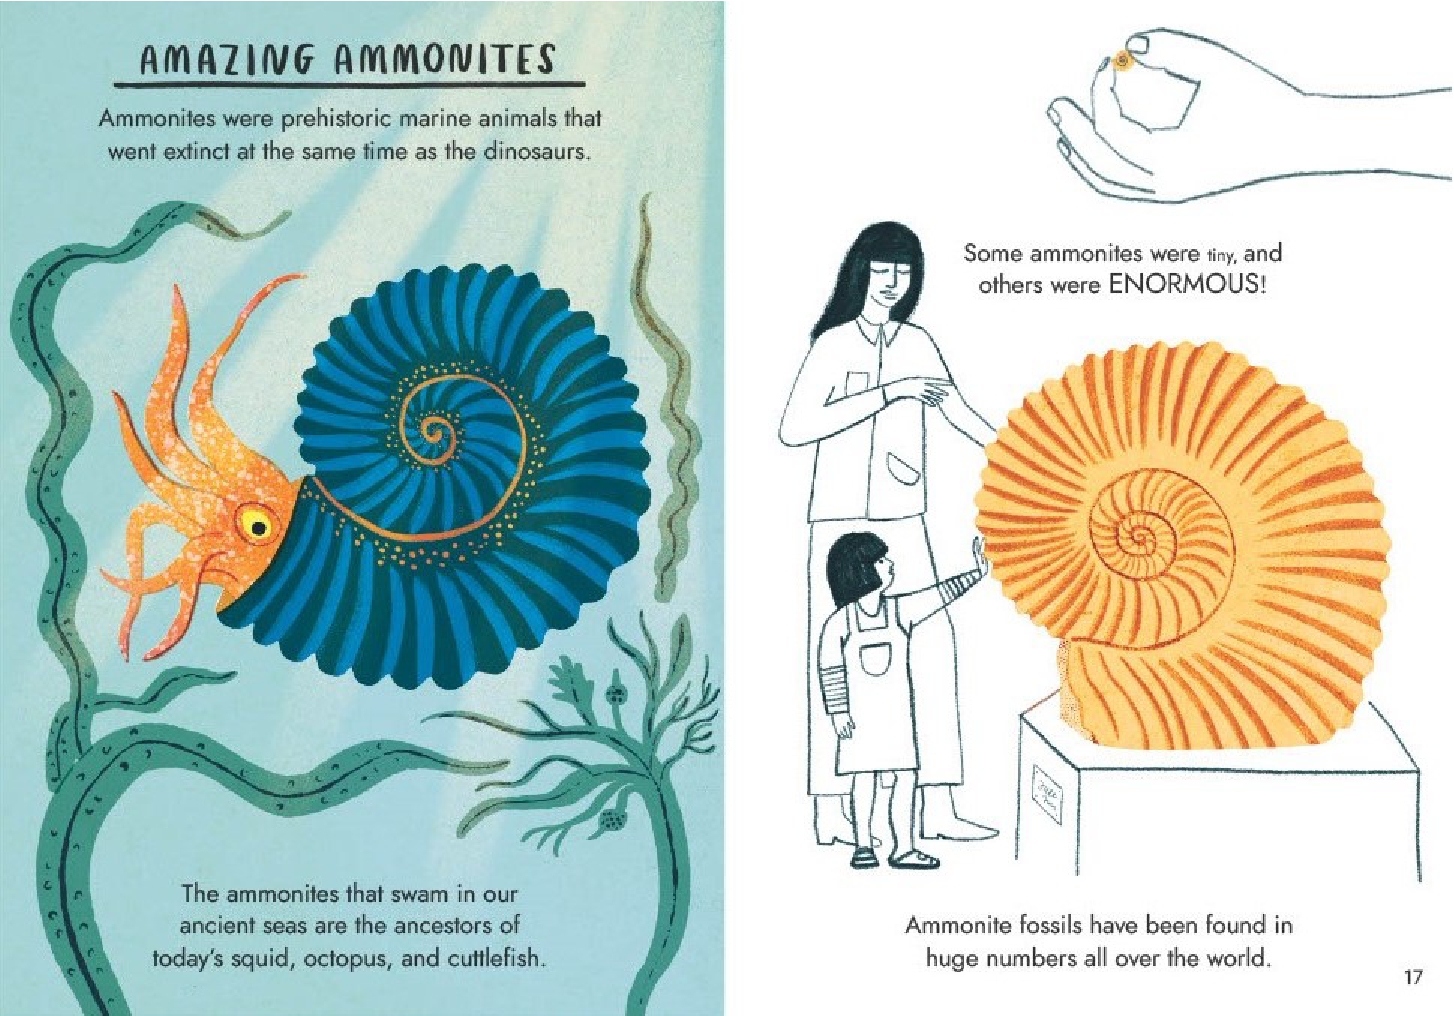 Little Guides to Nature: Hello Fossils and Shells